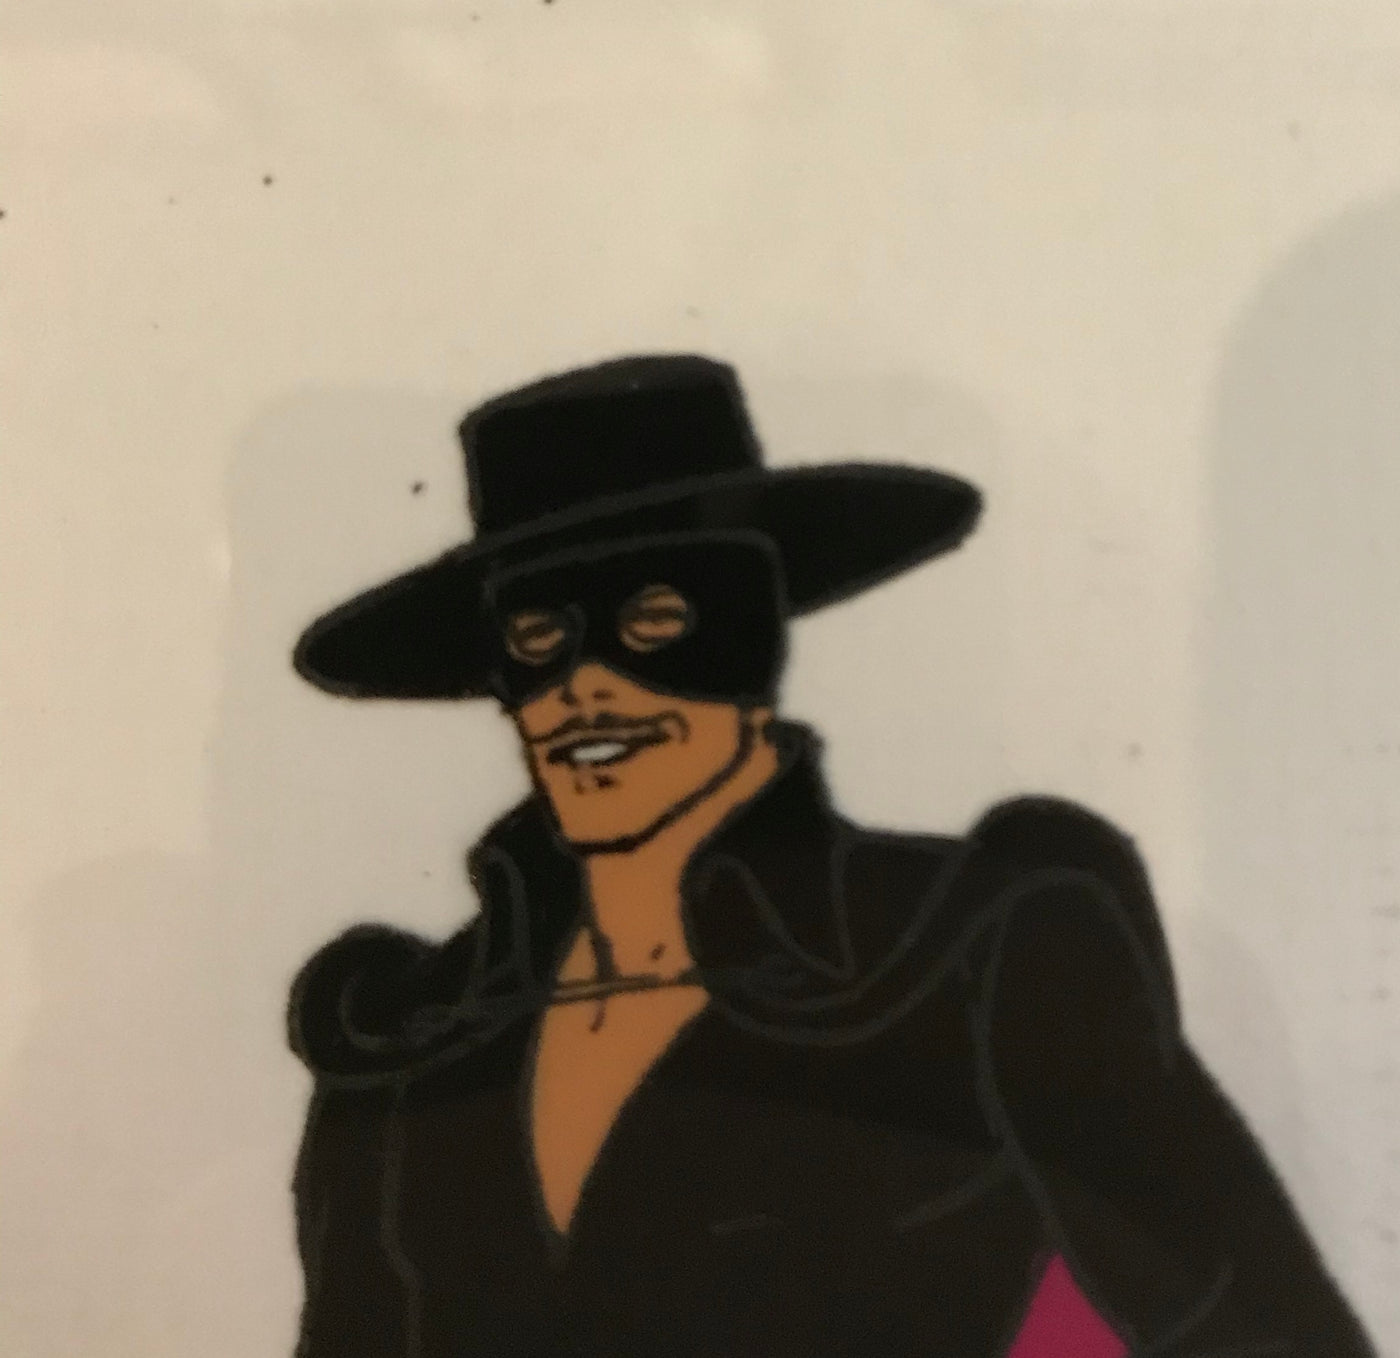 Filmation Model Cel from The New Adventures of Zorro featuring Zorro, Miguel, and Tempest